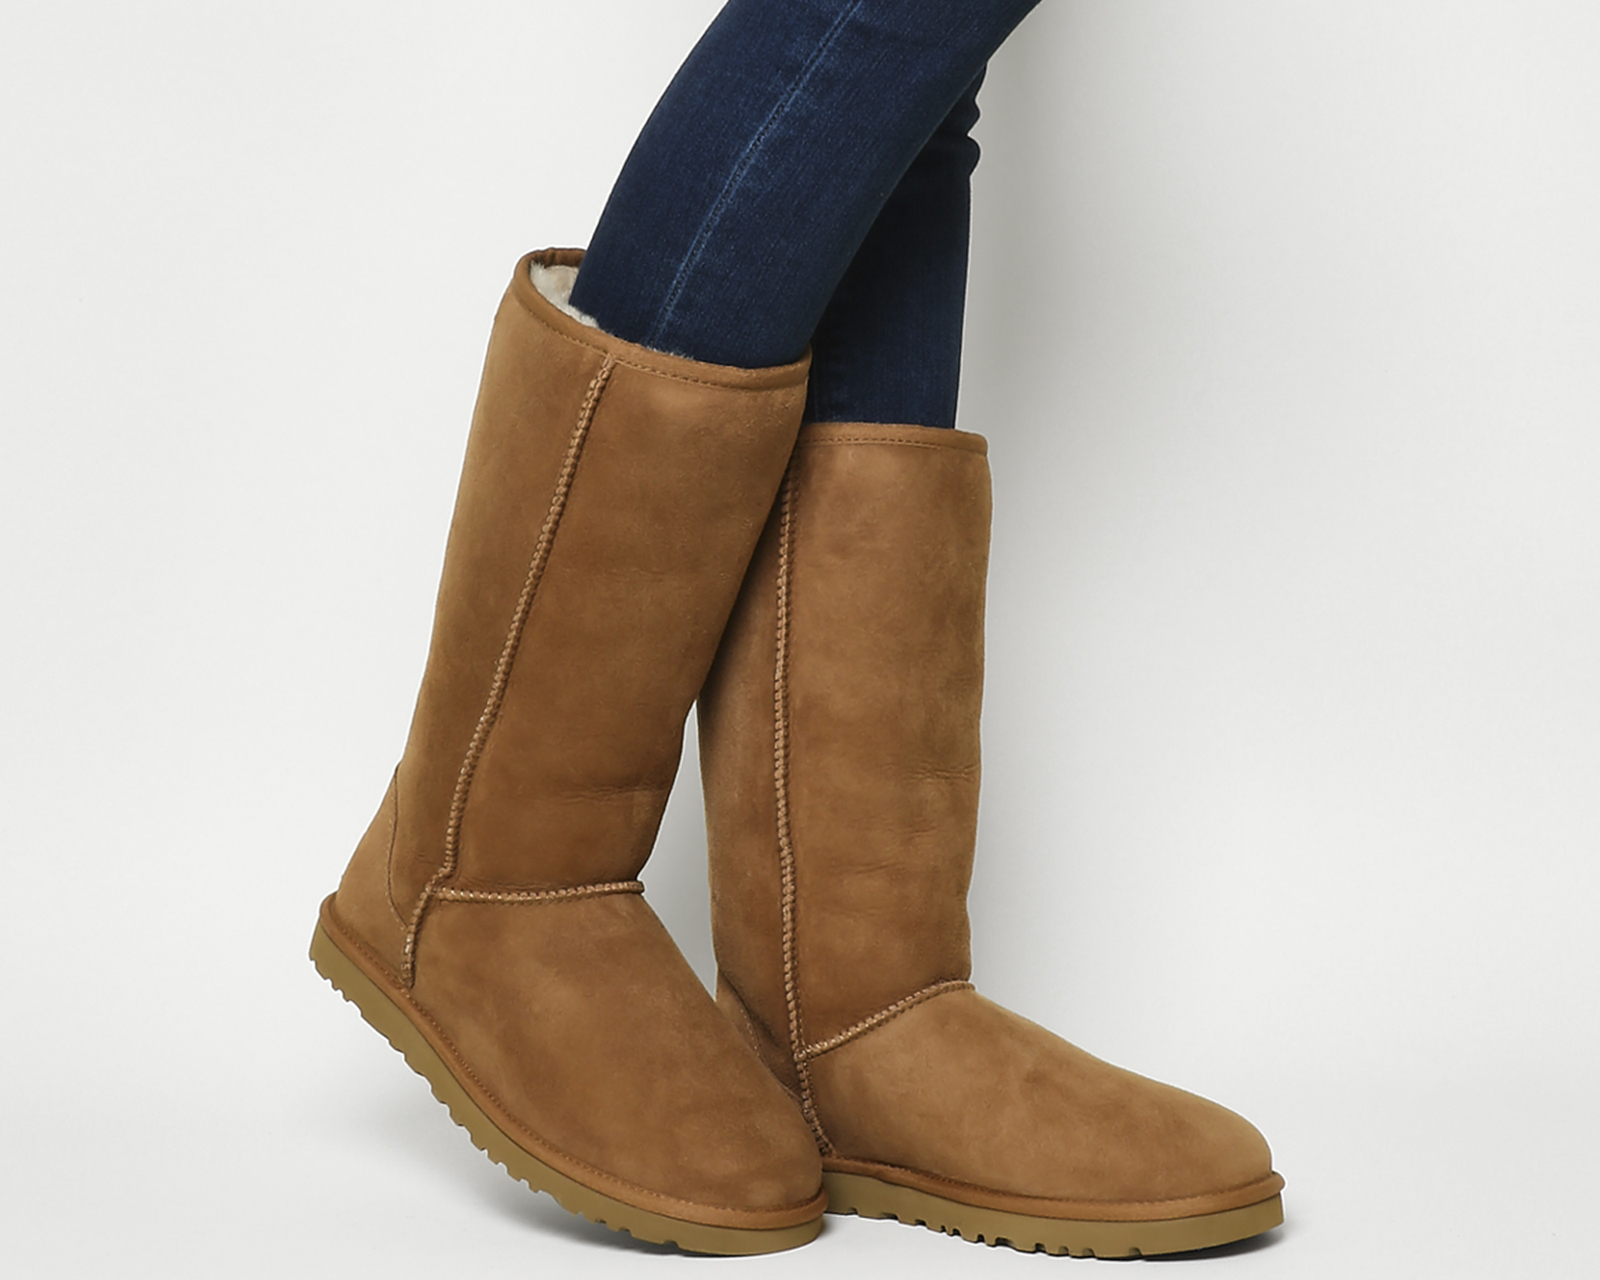 UGG Classic Tall Boots Chestnut - Knee High Boots